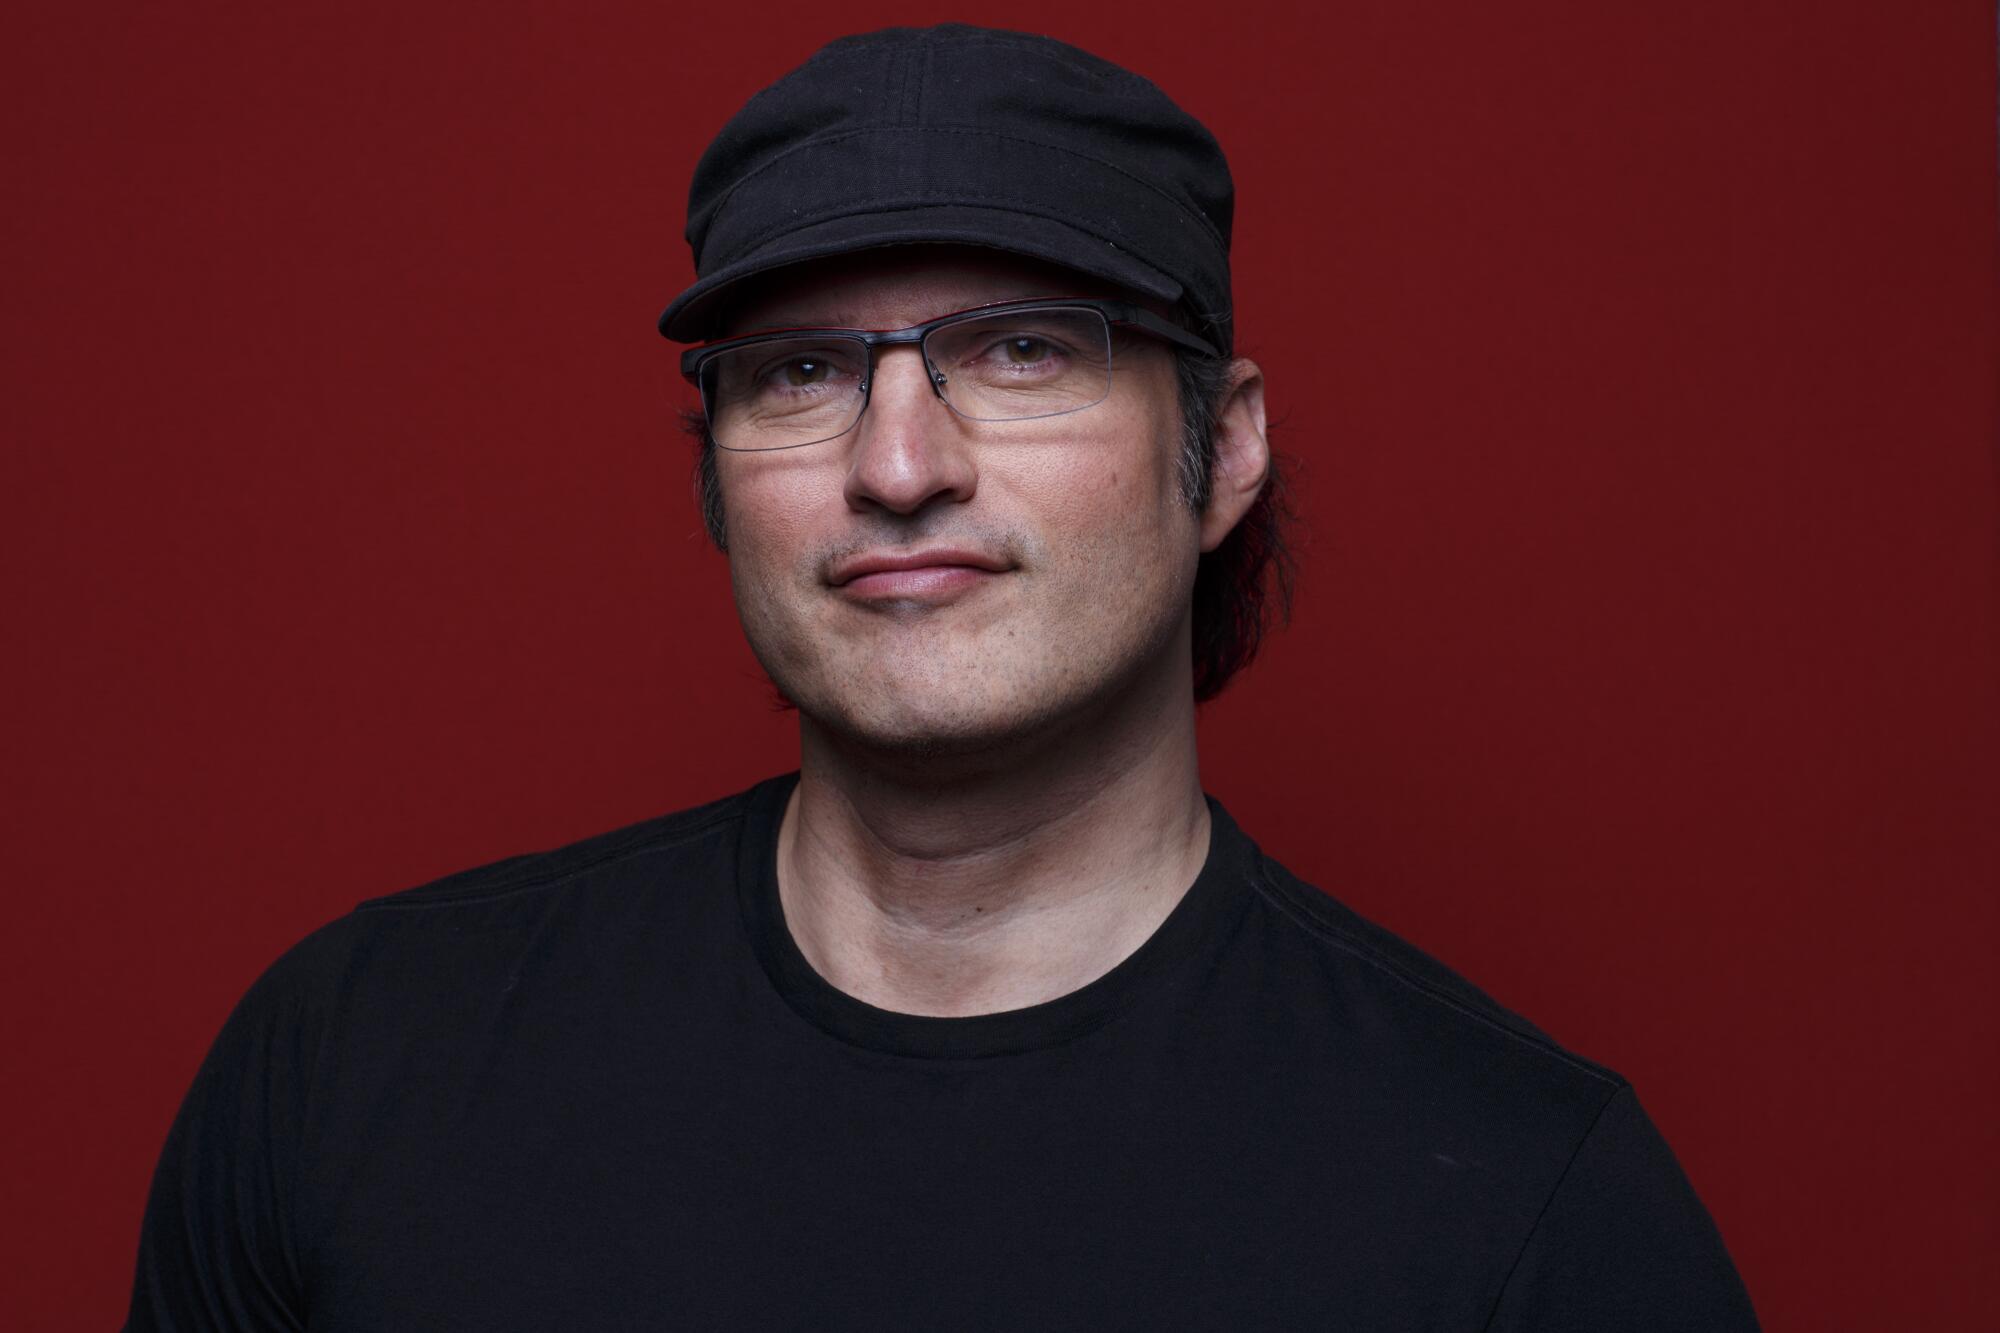 A man wearing glasses and a dark T-shirt and hat